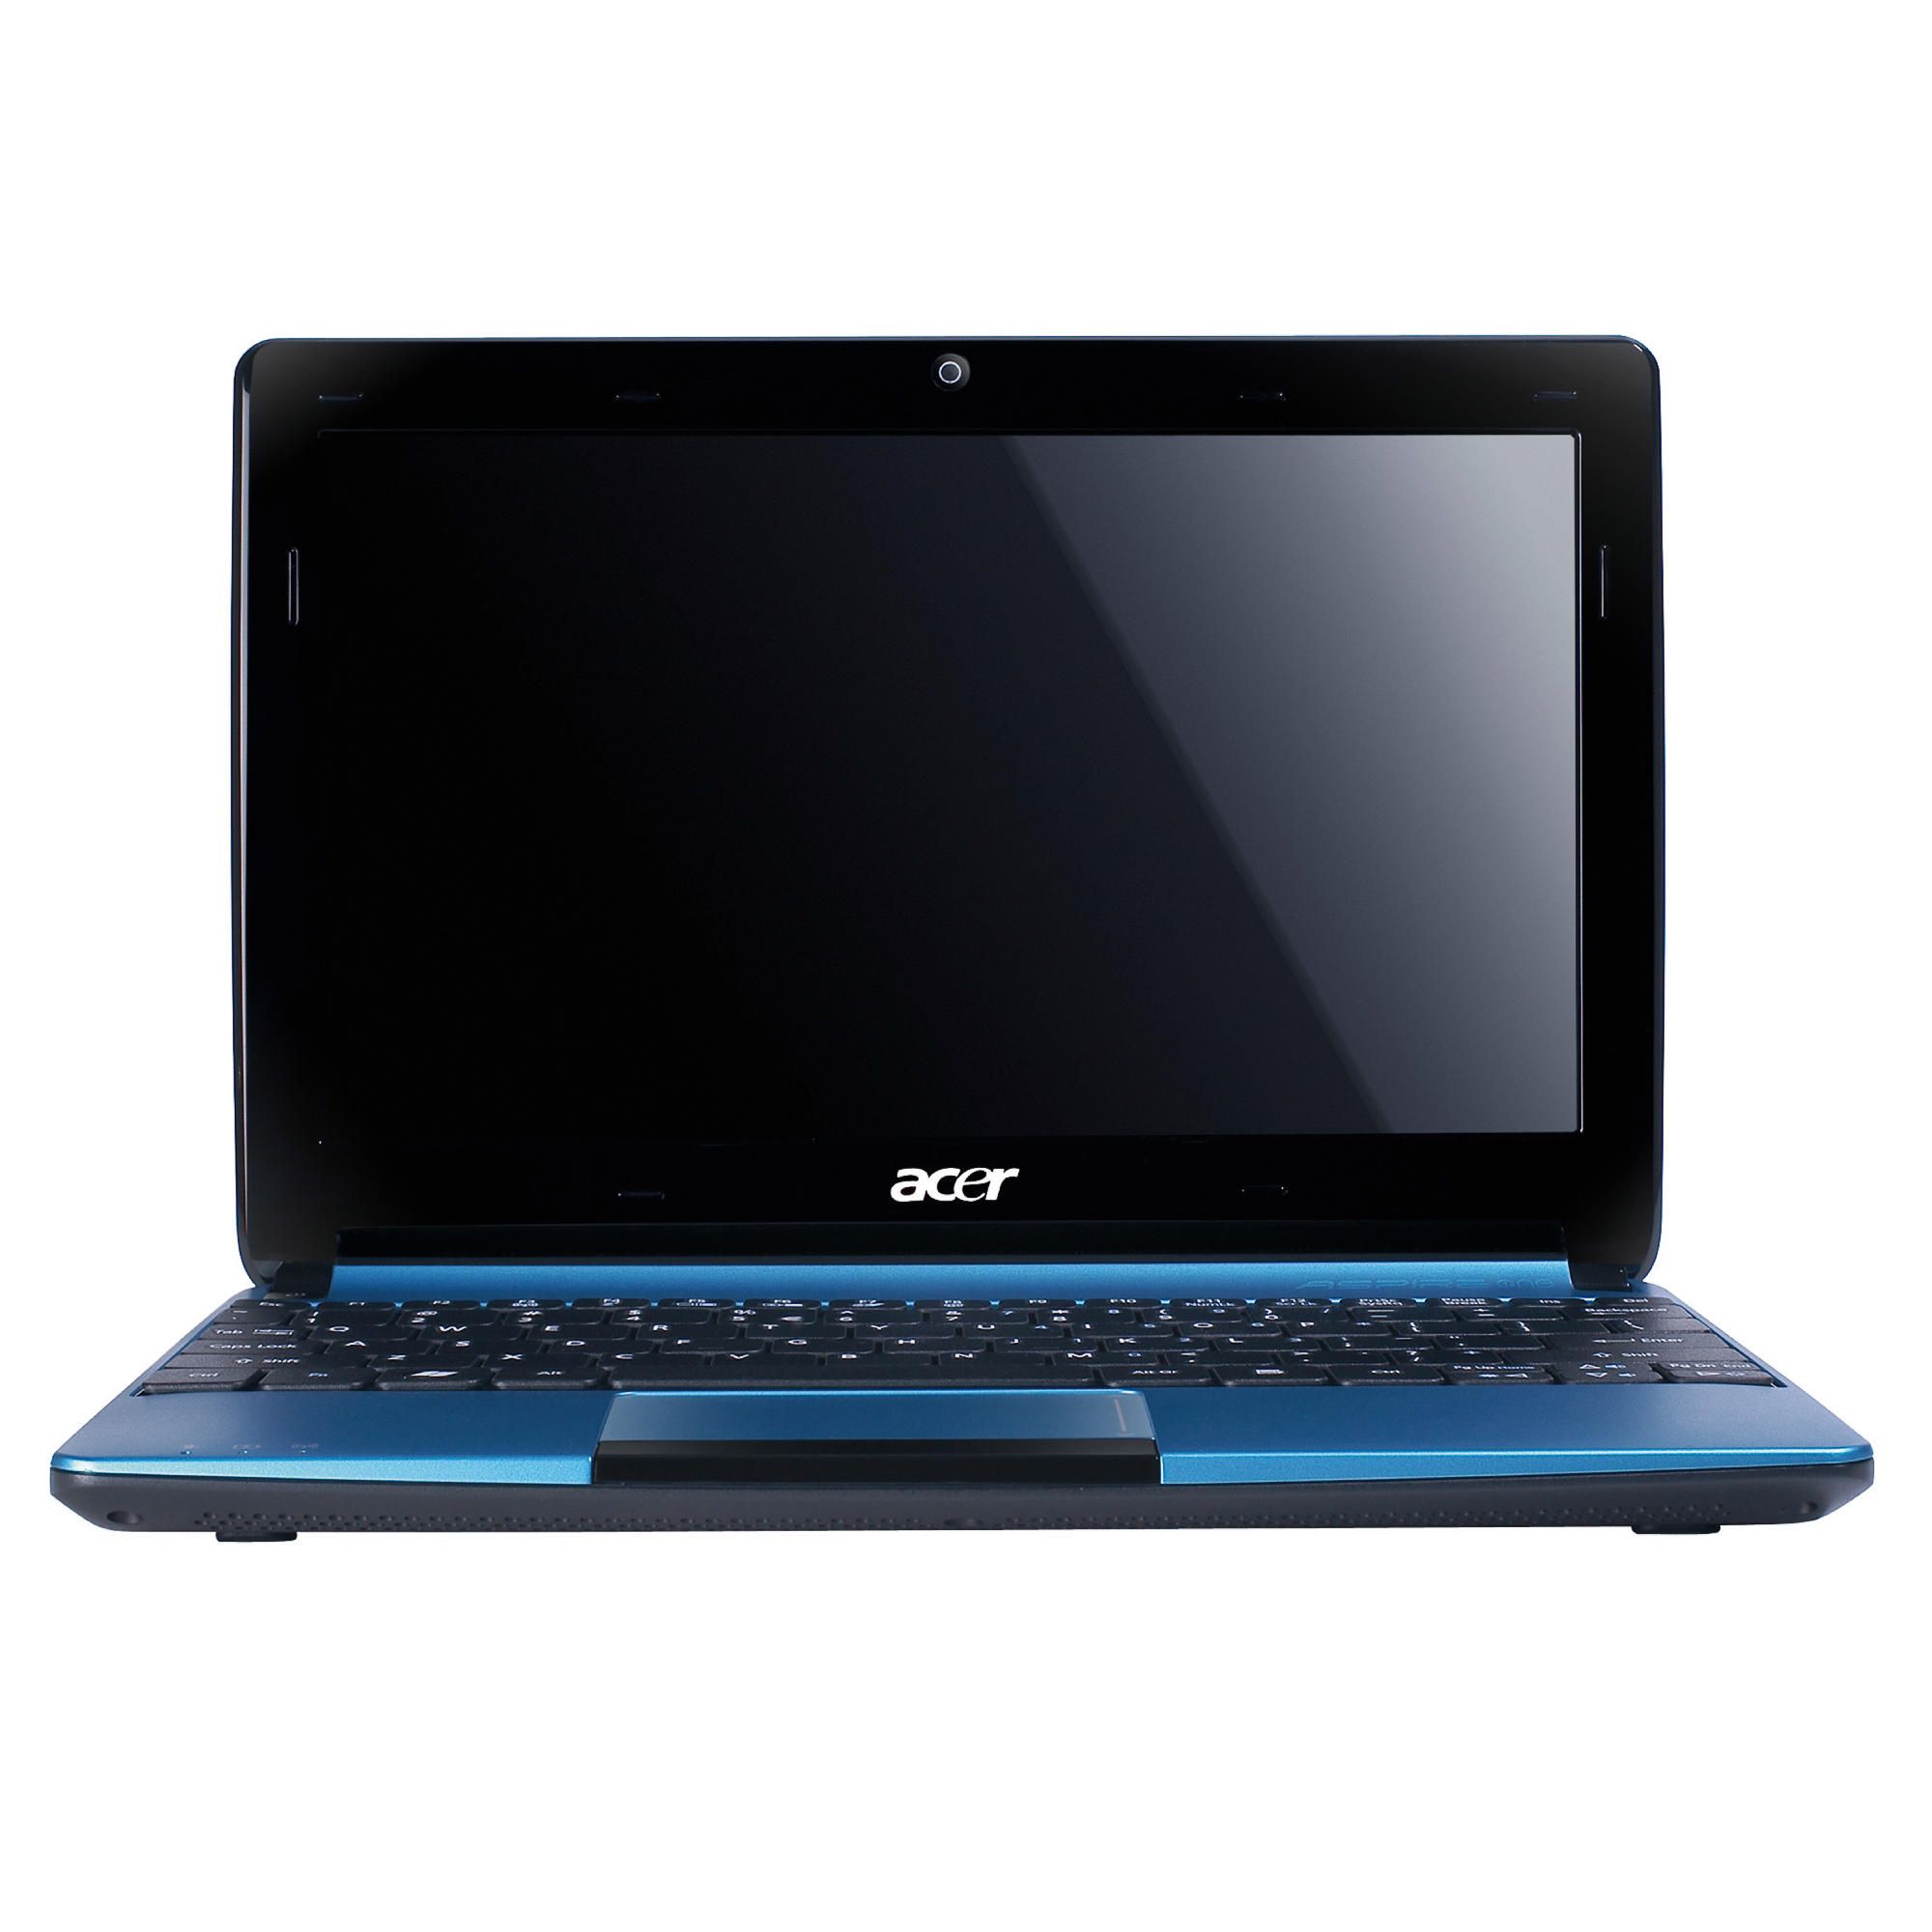 Acer Aspire One D257 Netbook (Intel Atom, 1GB, 250GB, 10.1'' Display) Blue at Tesco Direct